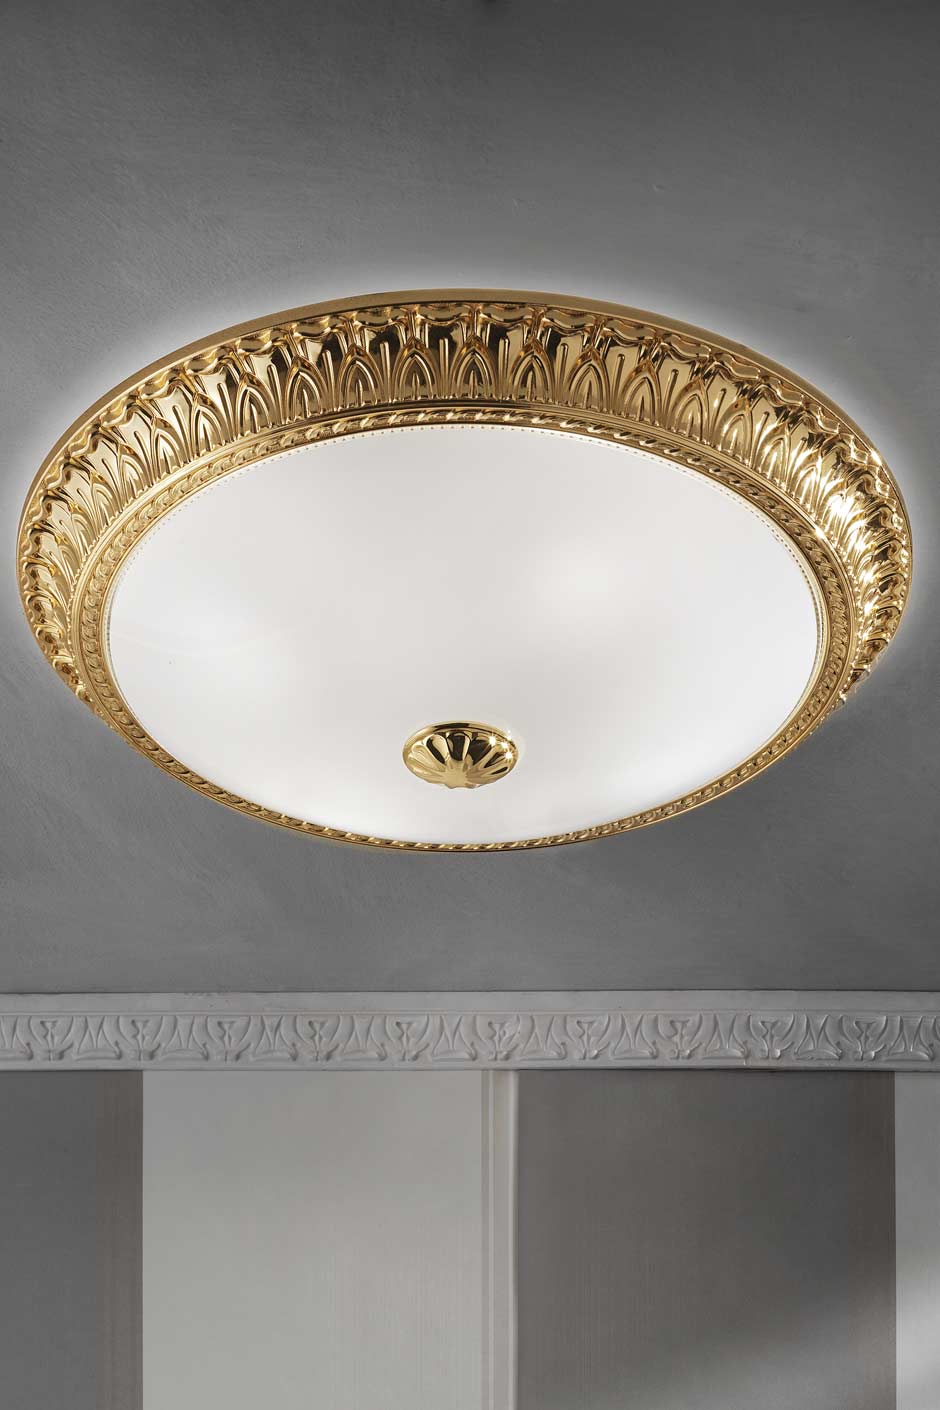 Large Round Ceiling Light In Gold Plated Bronze With Festoon Motif And White Glass Diffuser